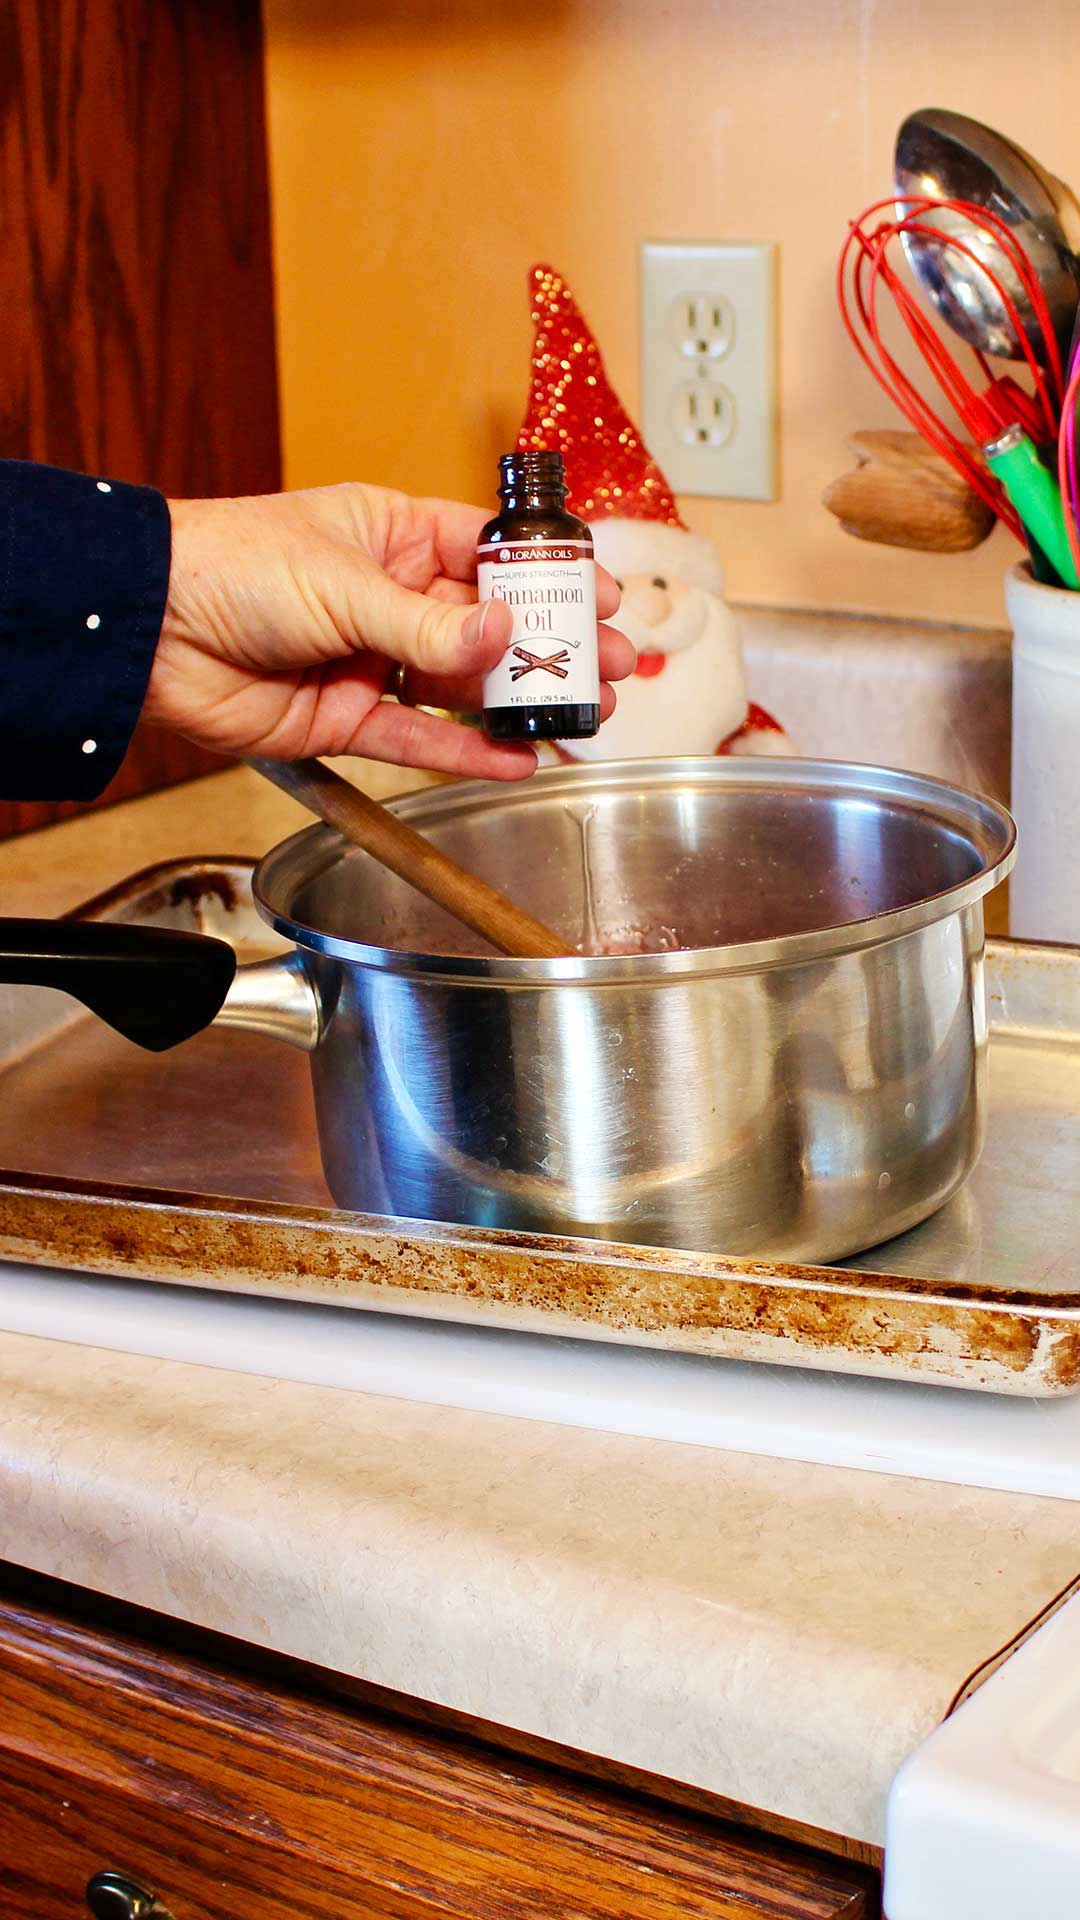 Hand holding bottle of cinnamon oil above a saucepan sitting on a cookie sheet.